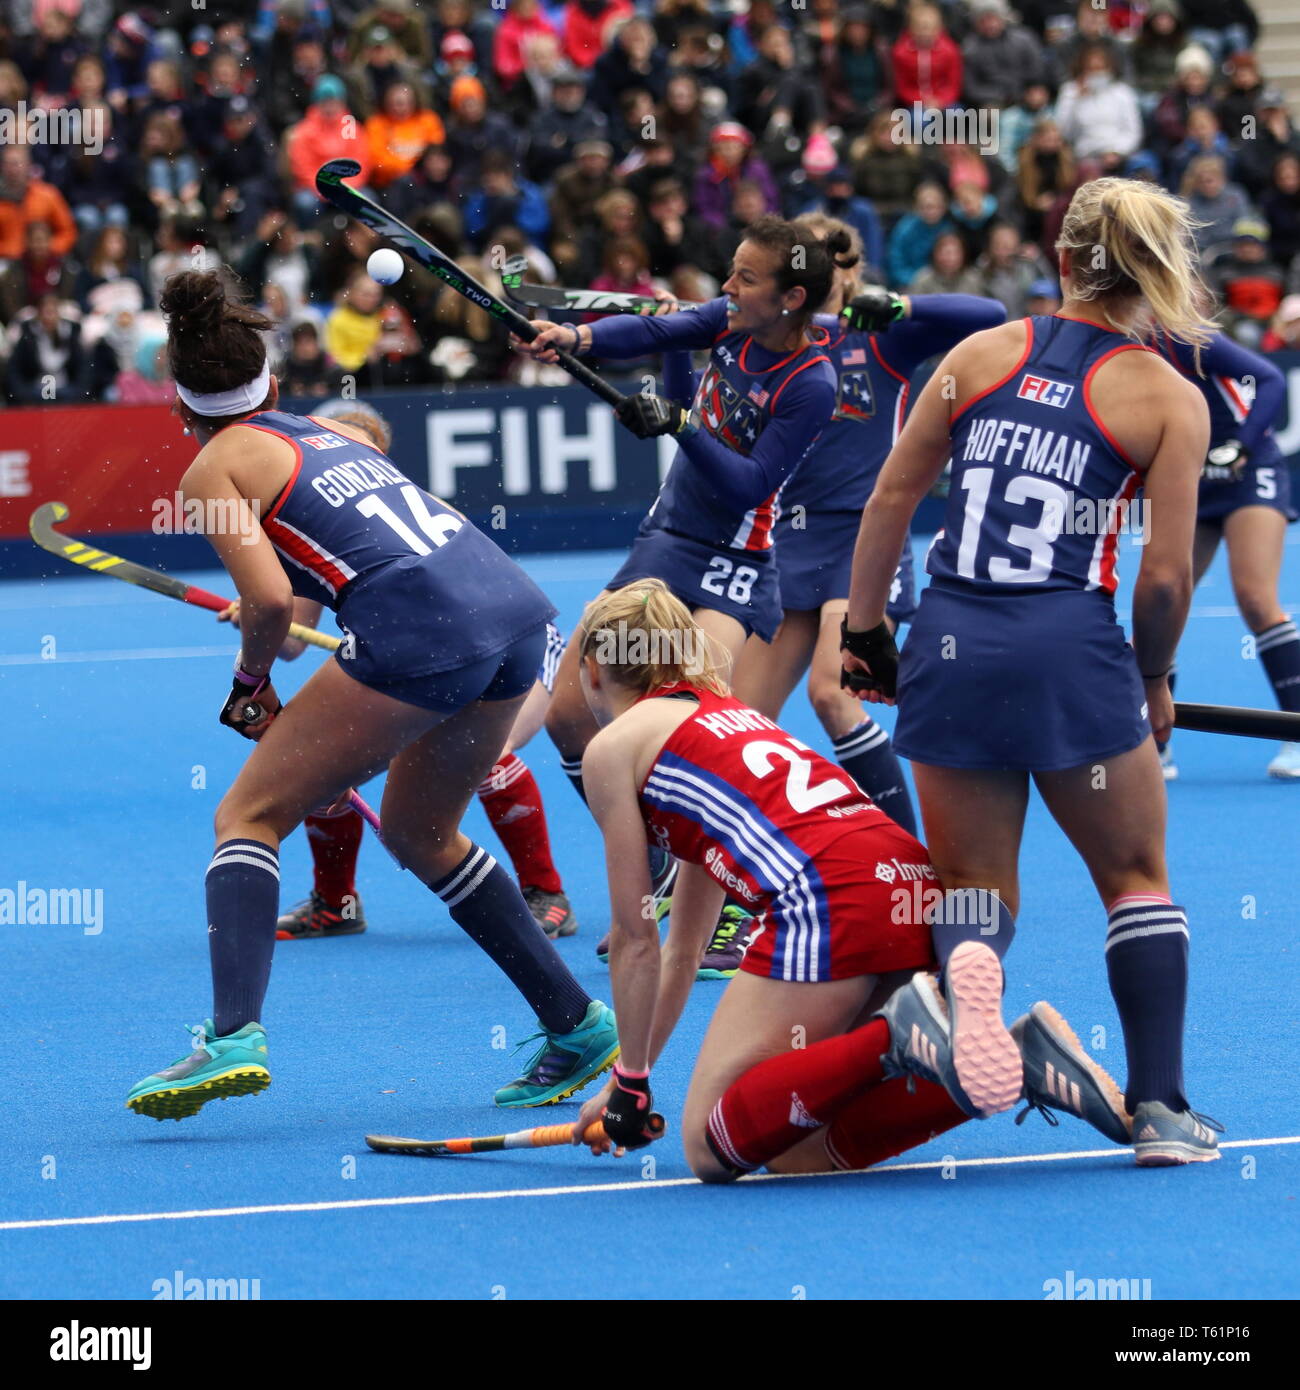 Jo Hunter (GBR) in the 2019 FIH Pro League Great Britain v United States women’s hockey match at Queens Elizabeth Olympic Park, London. Stock Photo